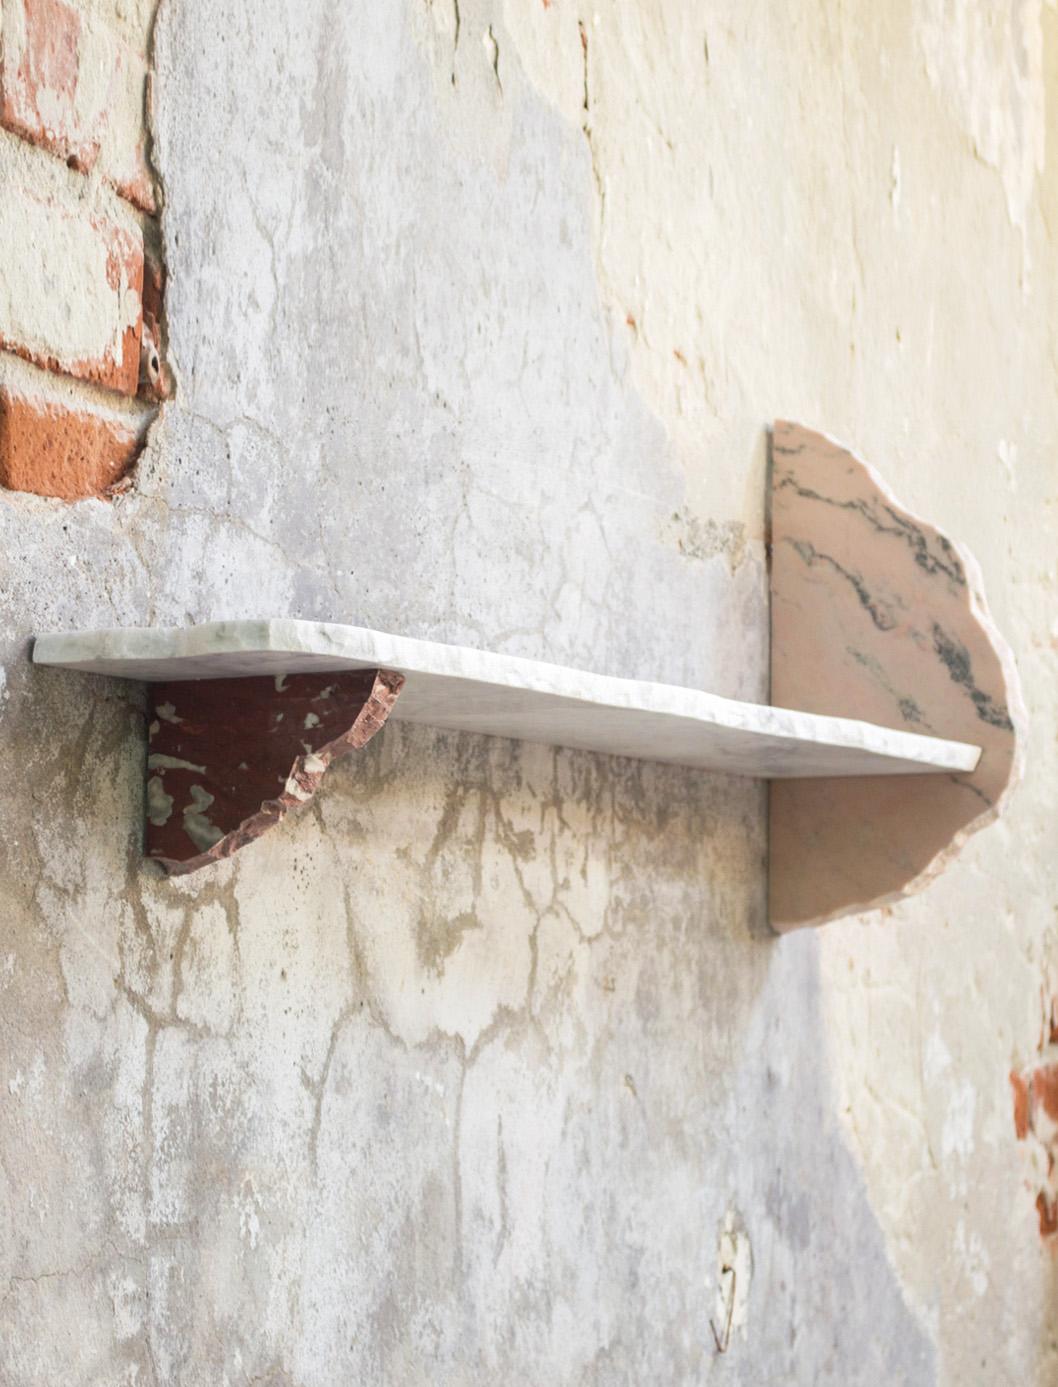 This one-of-a-kind design shelf is completely handmade in Carrara savaging marble elements from the production cycle. Duo Shelf is a product of sustainable design promoting circular economy being produced from savaged materials. Every piece is